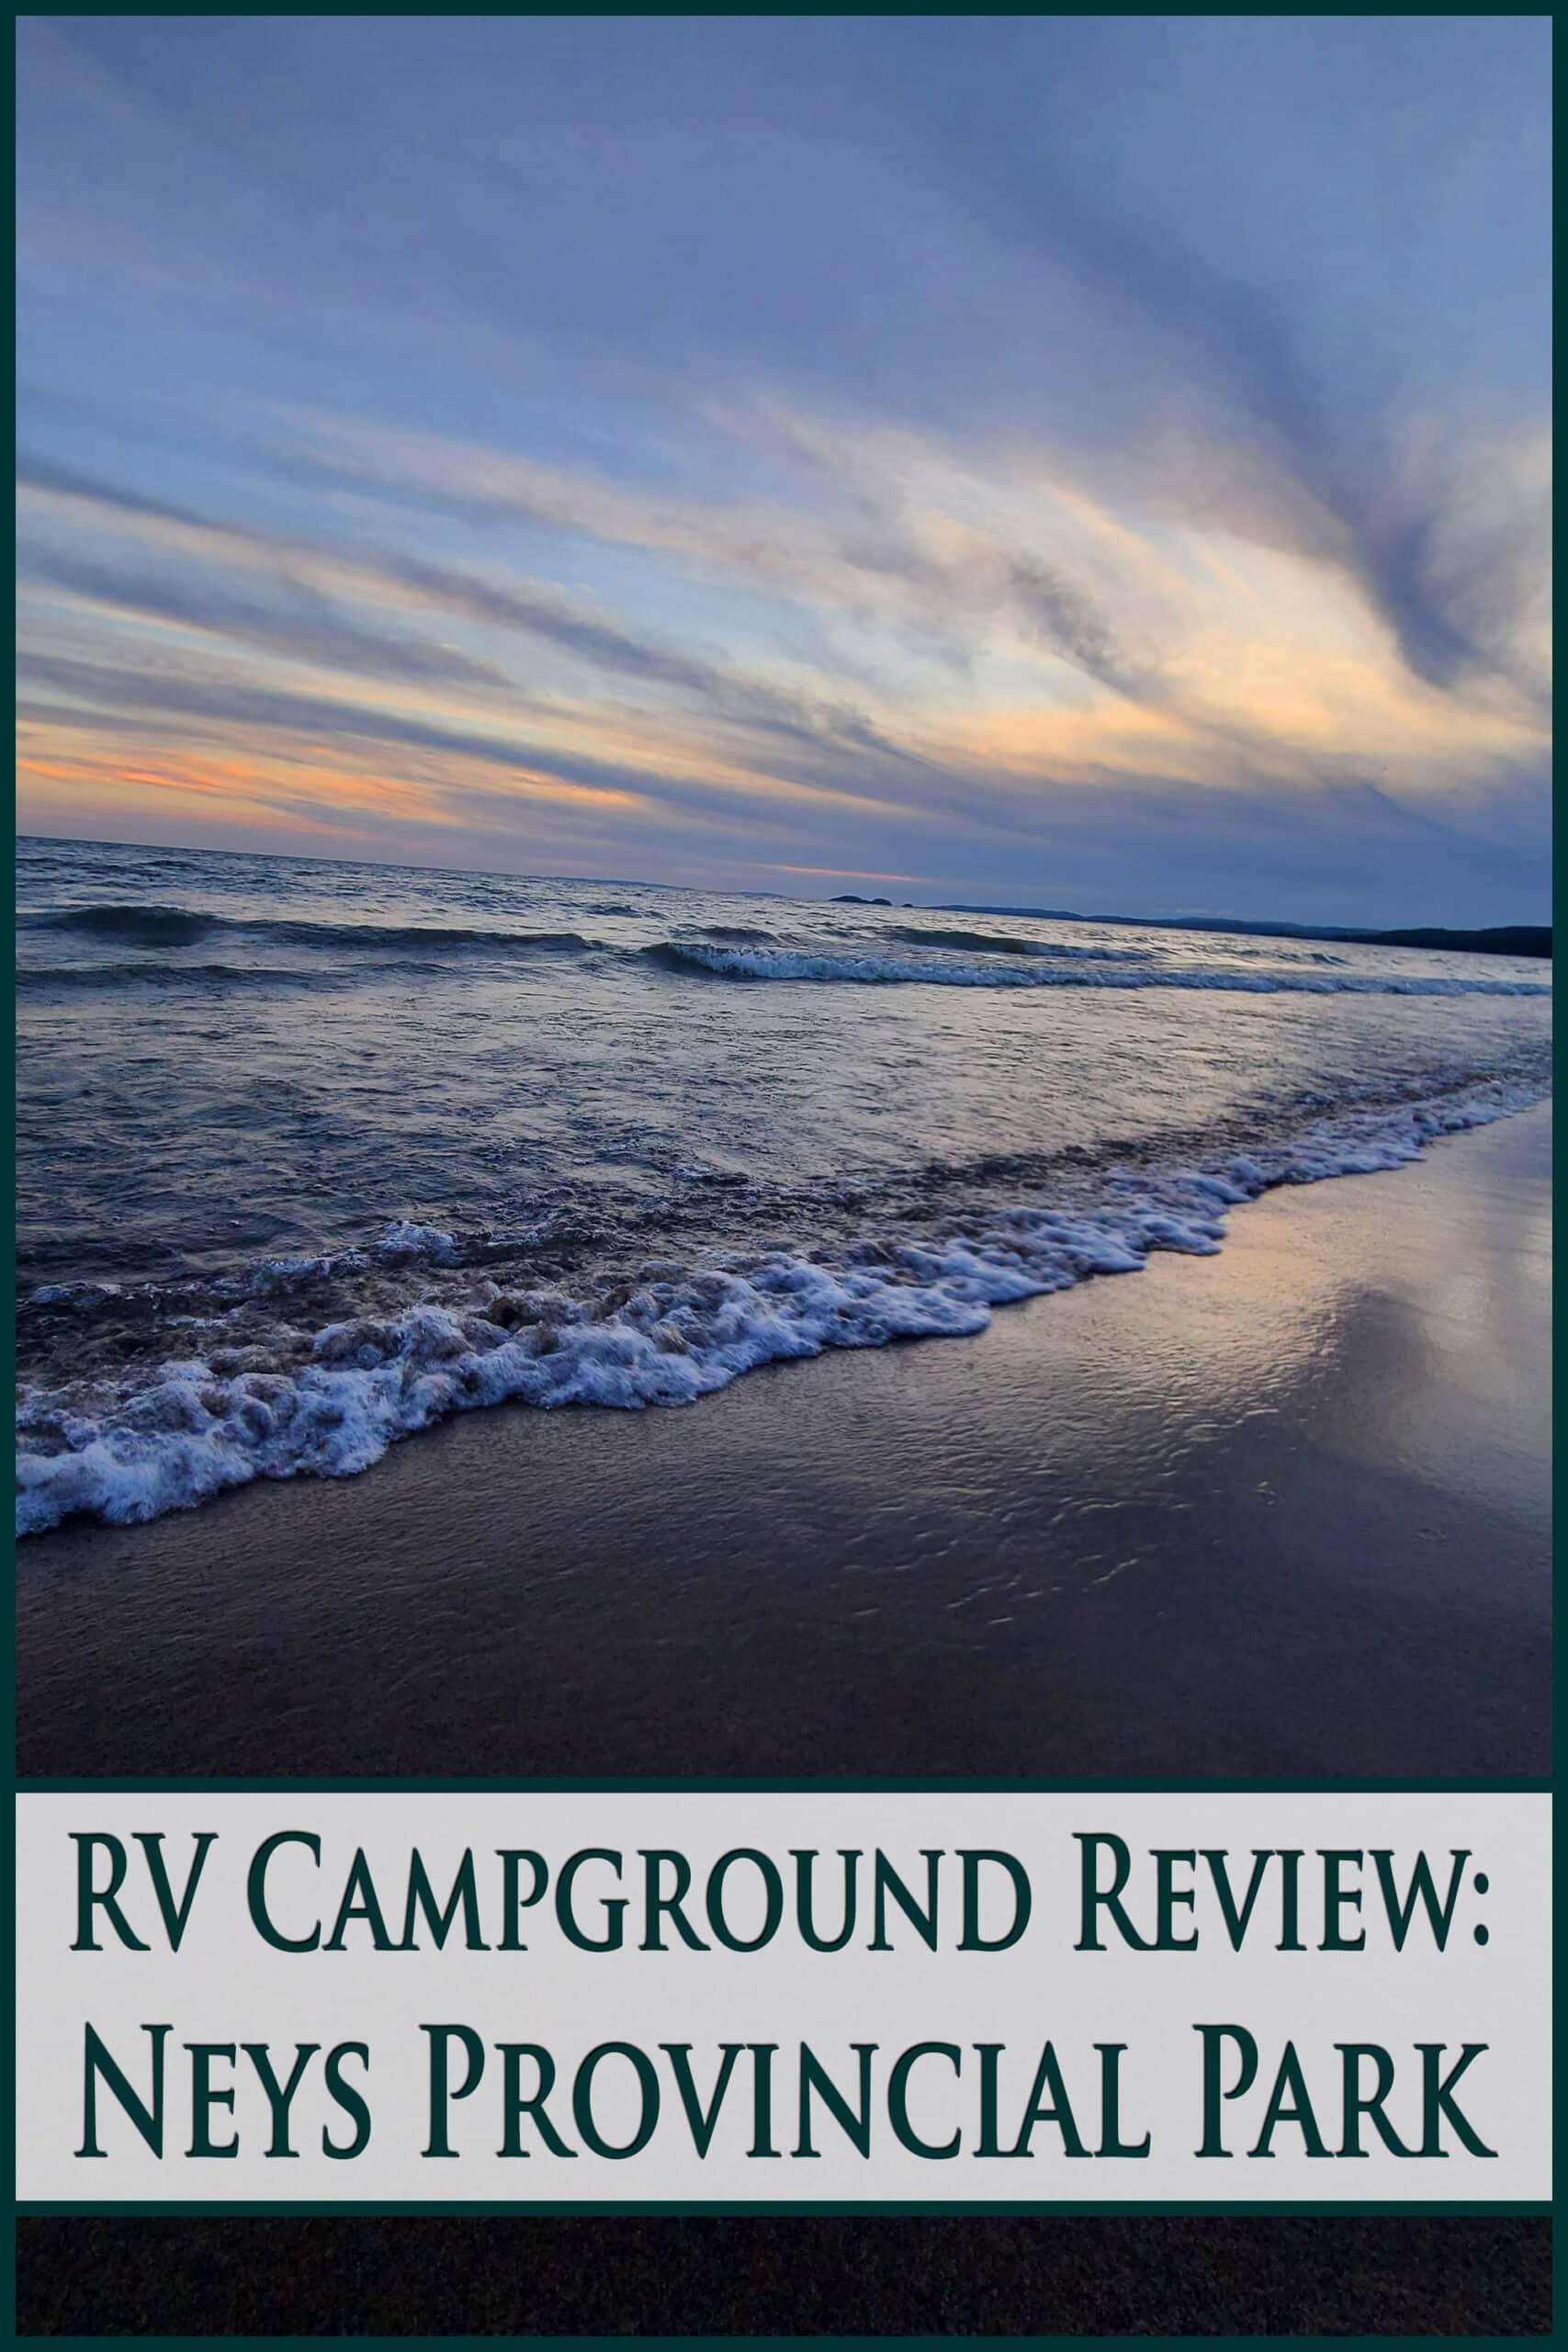 A lake superior sunset. Overlaid text says rv campground review neys provincial park.